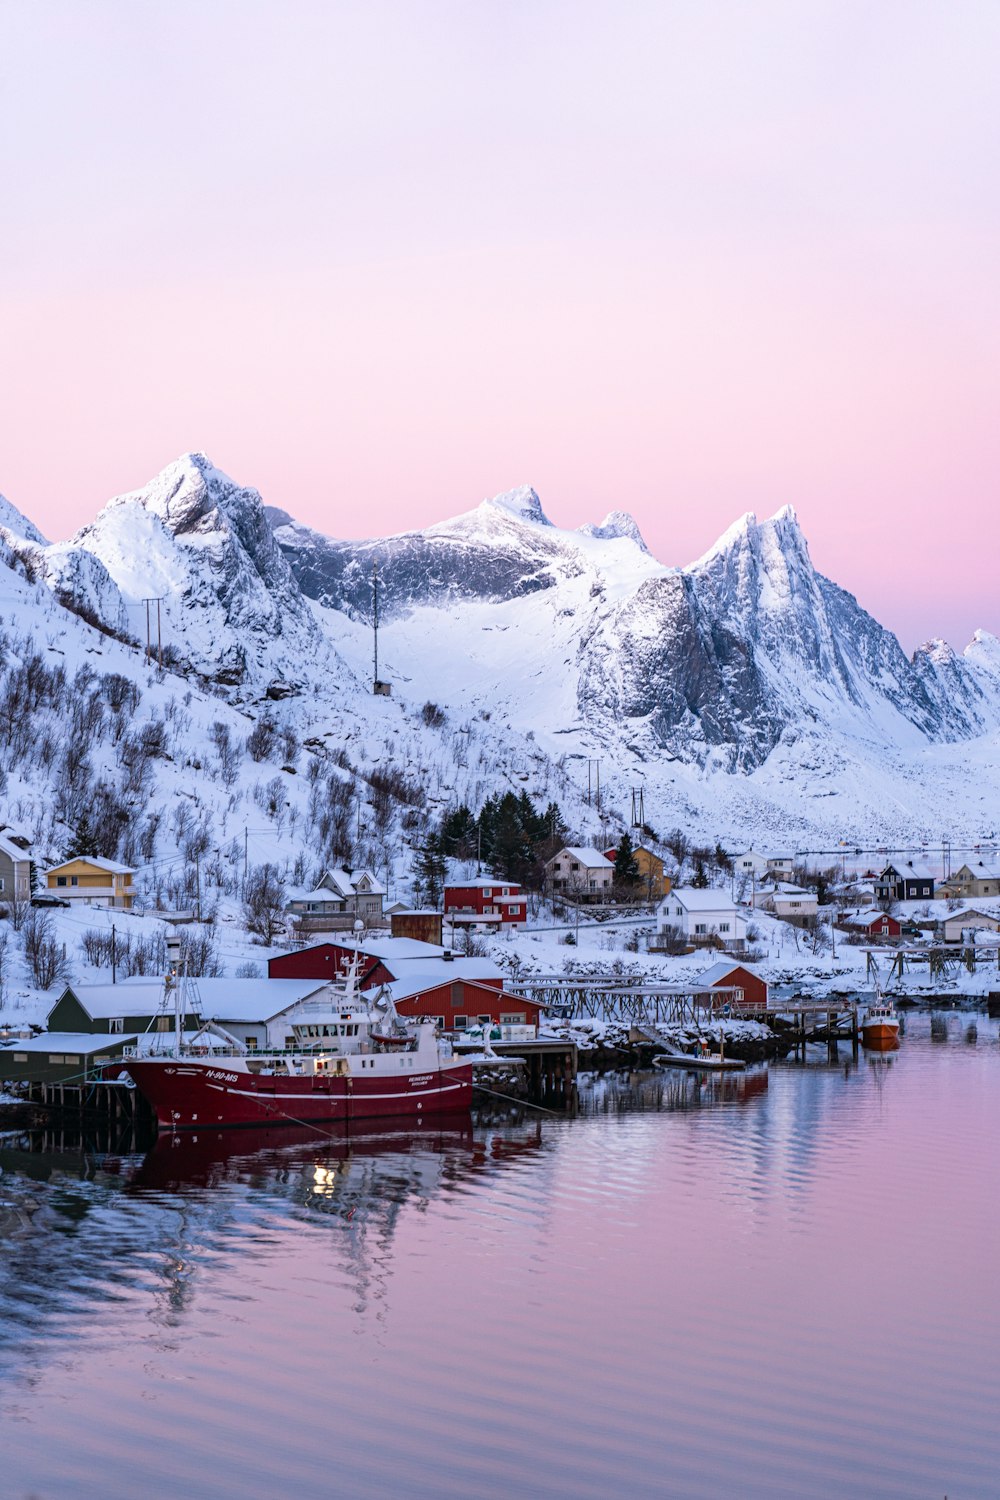 a boat is docked in the water in front of a snowy mountain